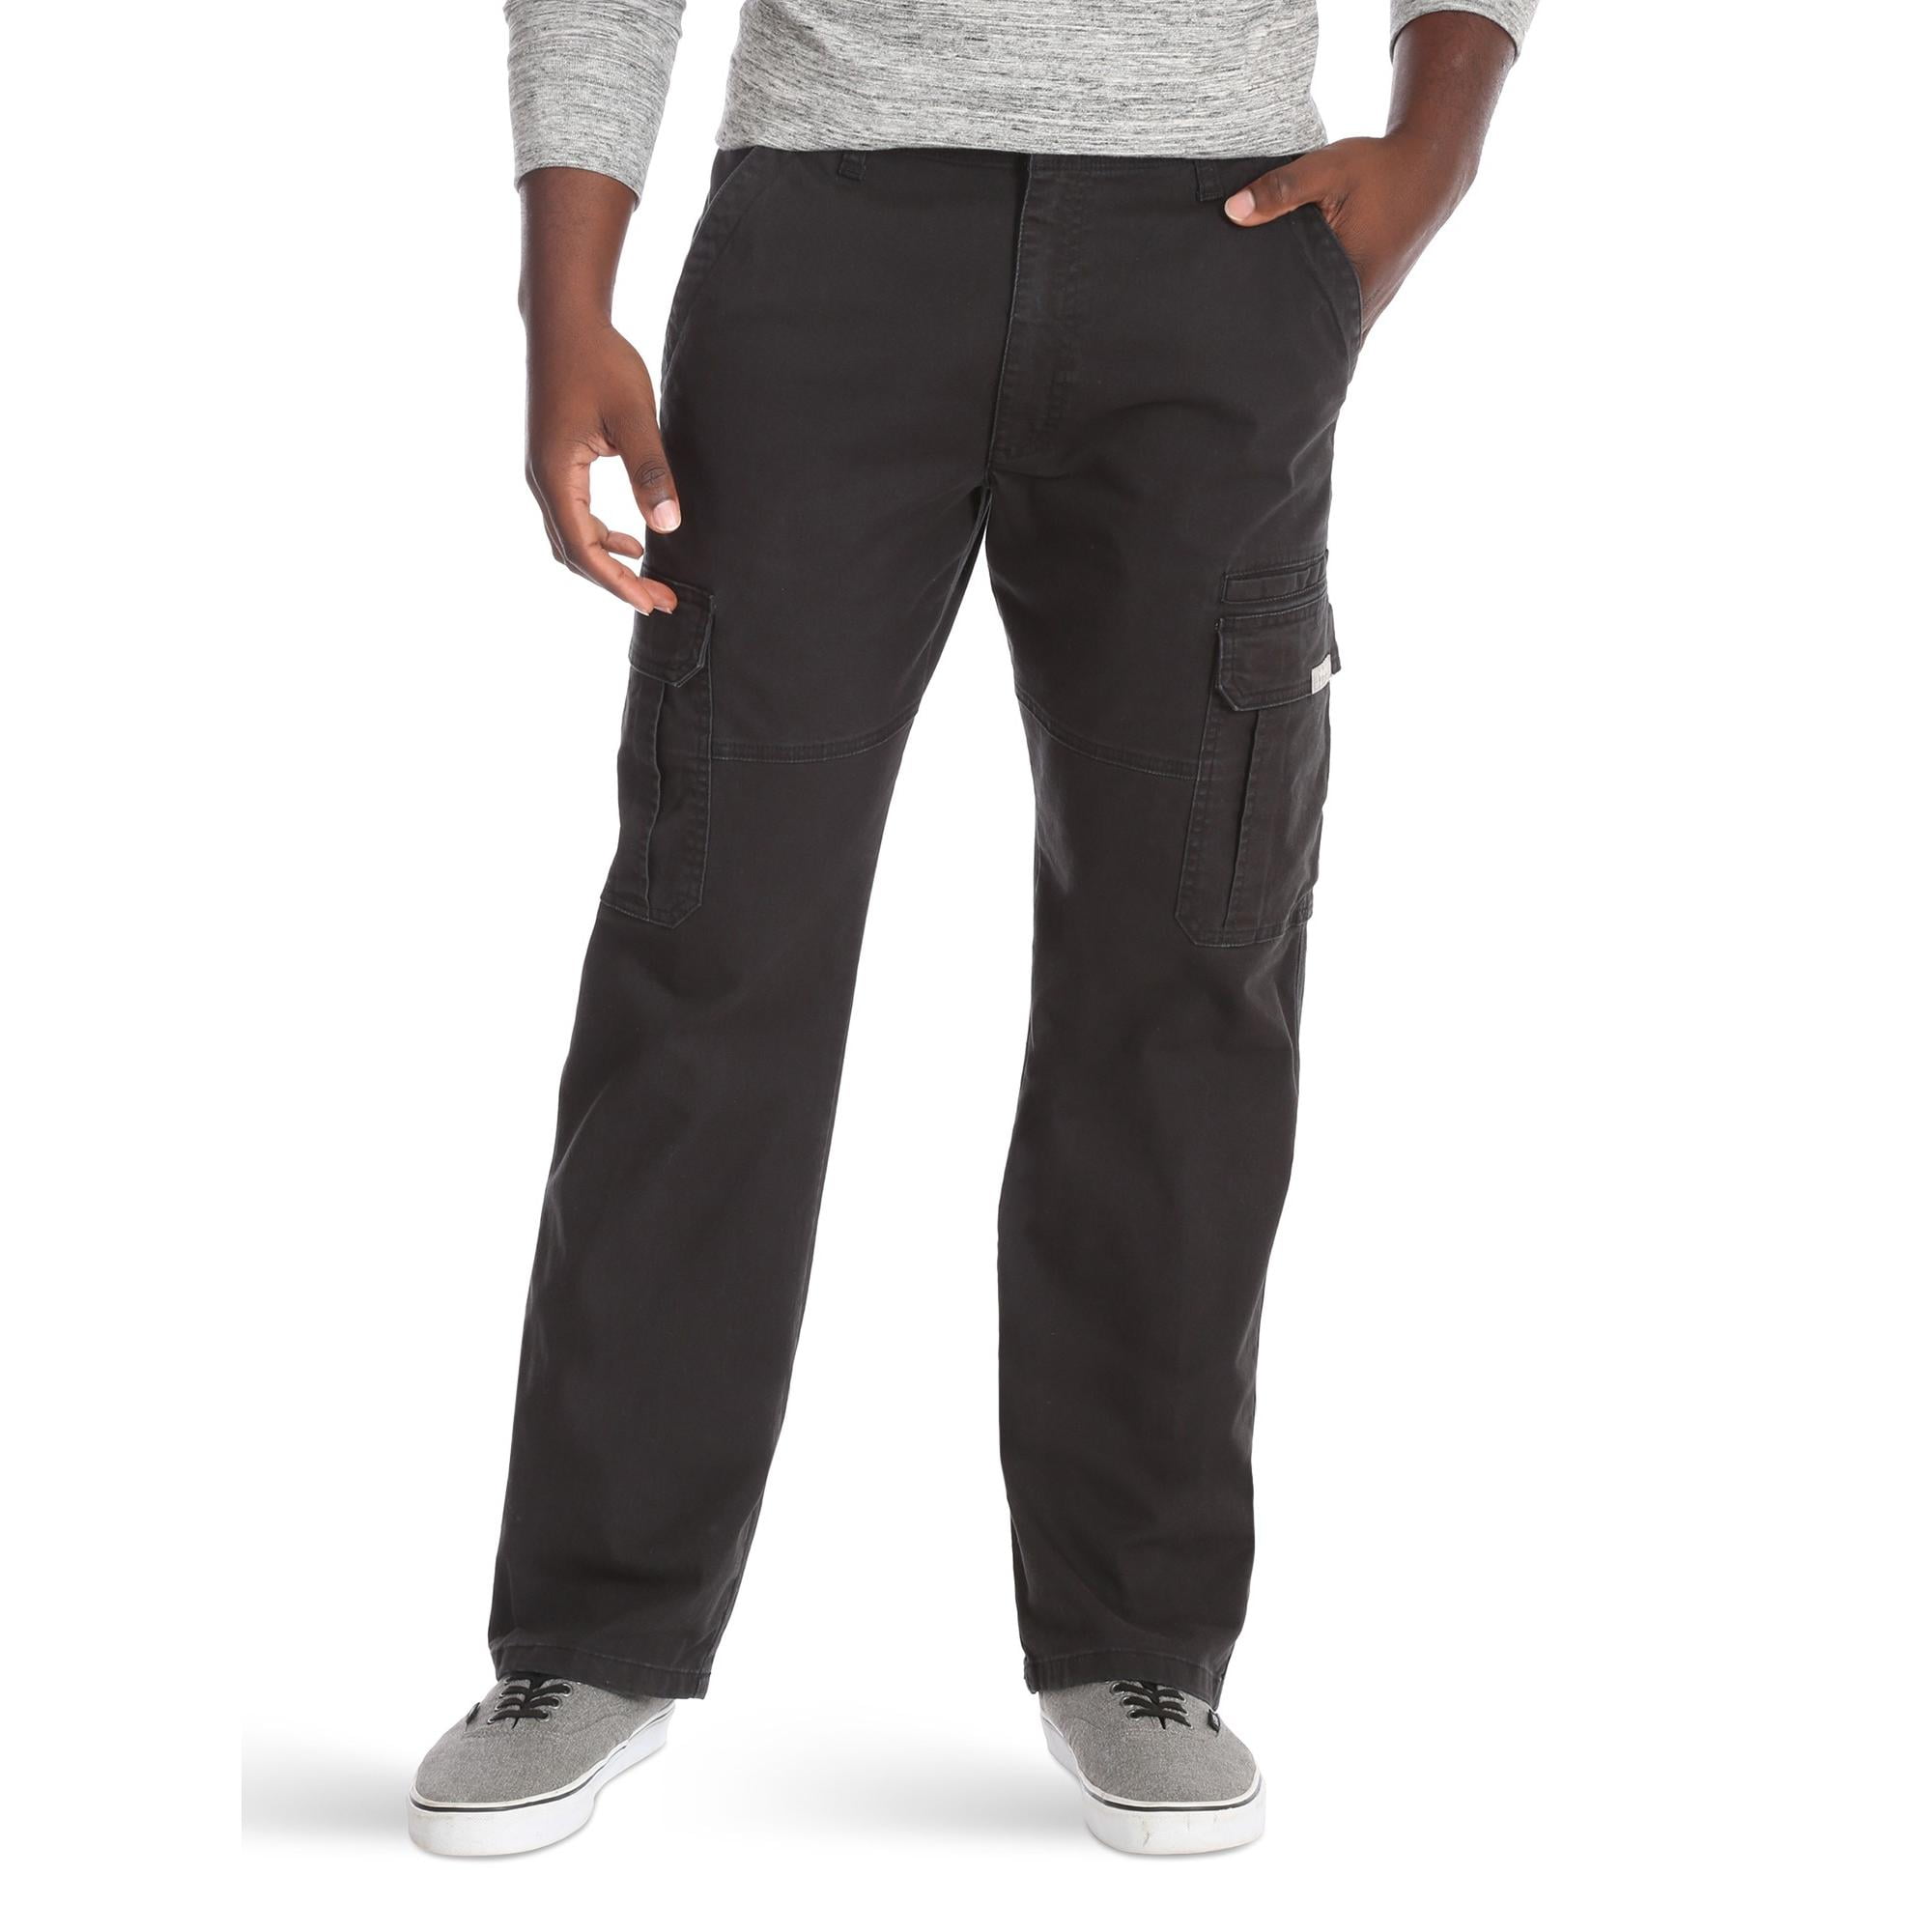 Wrangler Men's and Big Men's Relaxed Fit Cargo Pants with Stretch ...